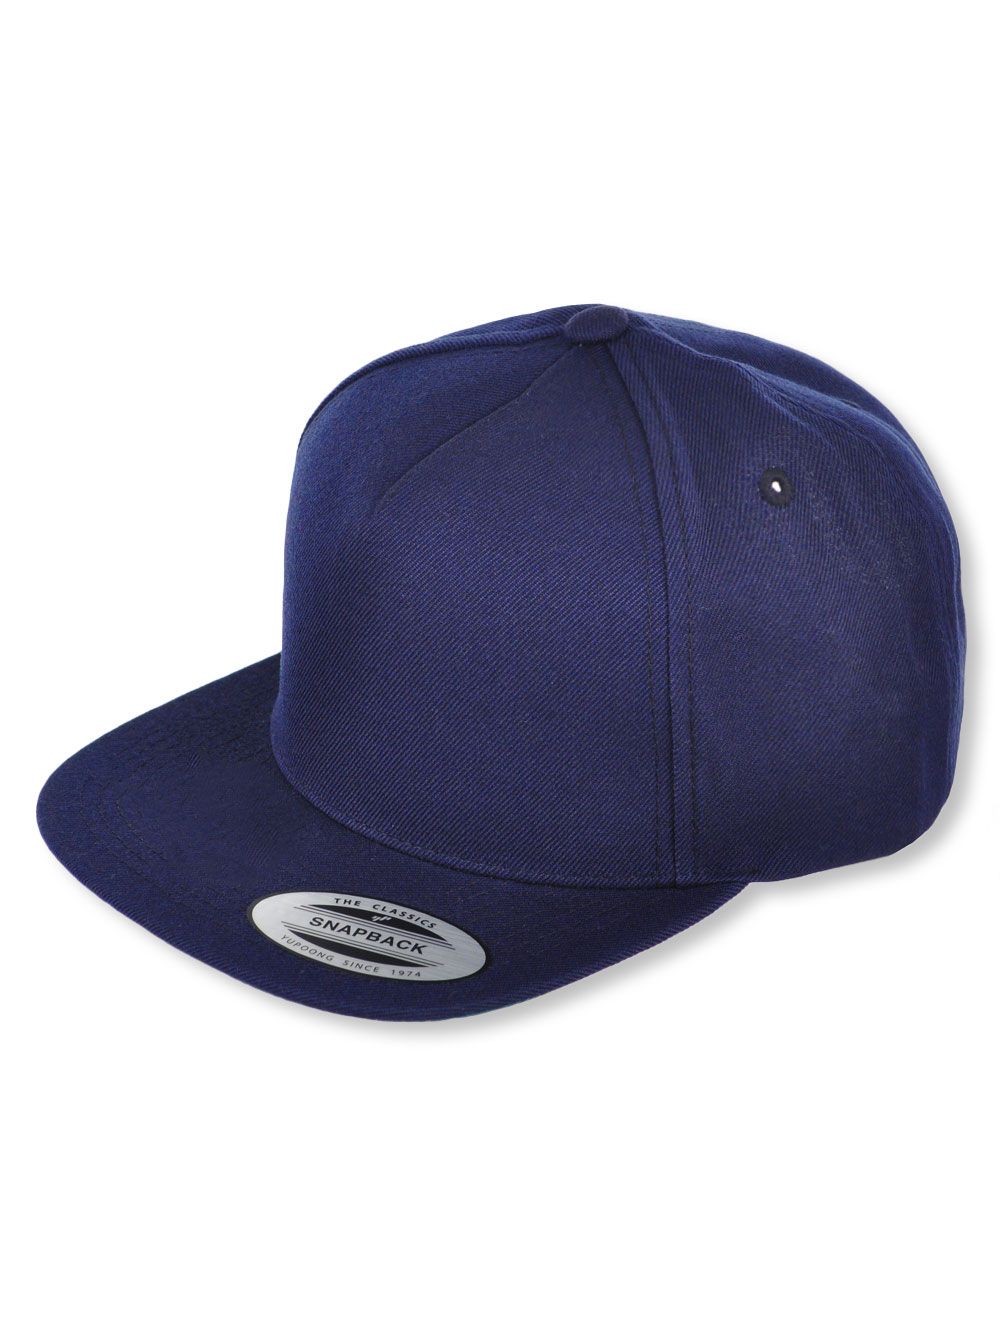 Toddler and Youth Cap